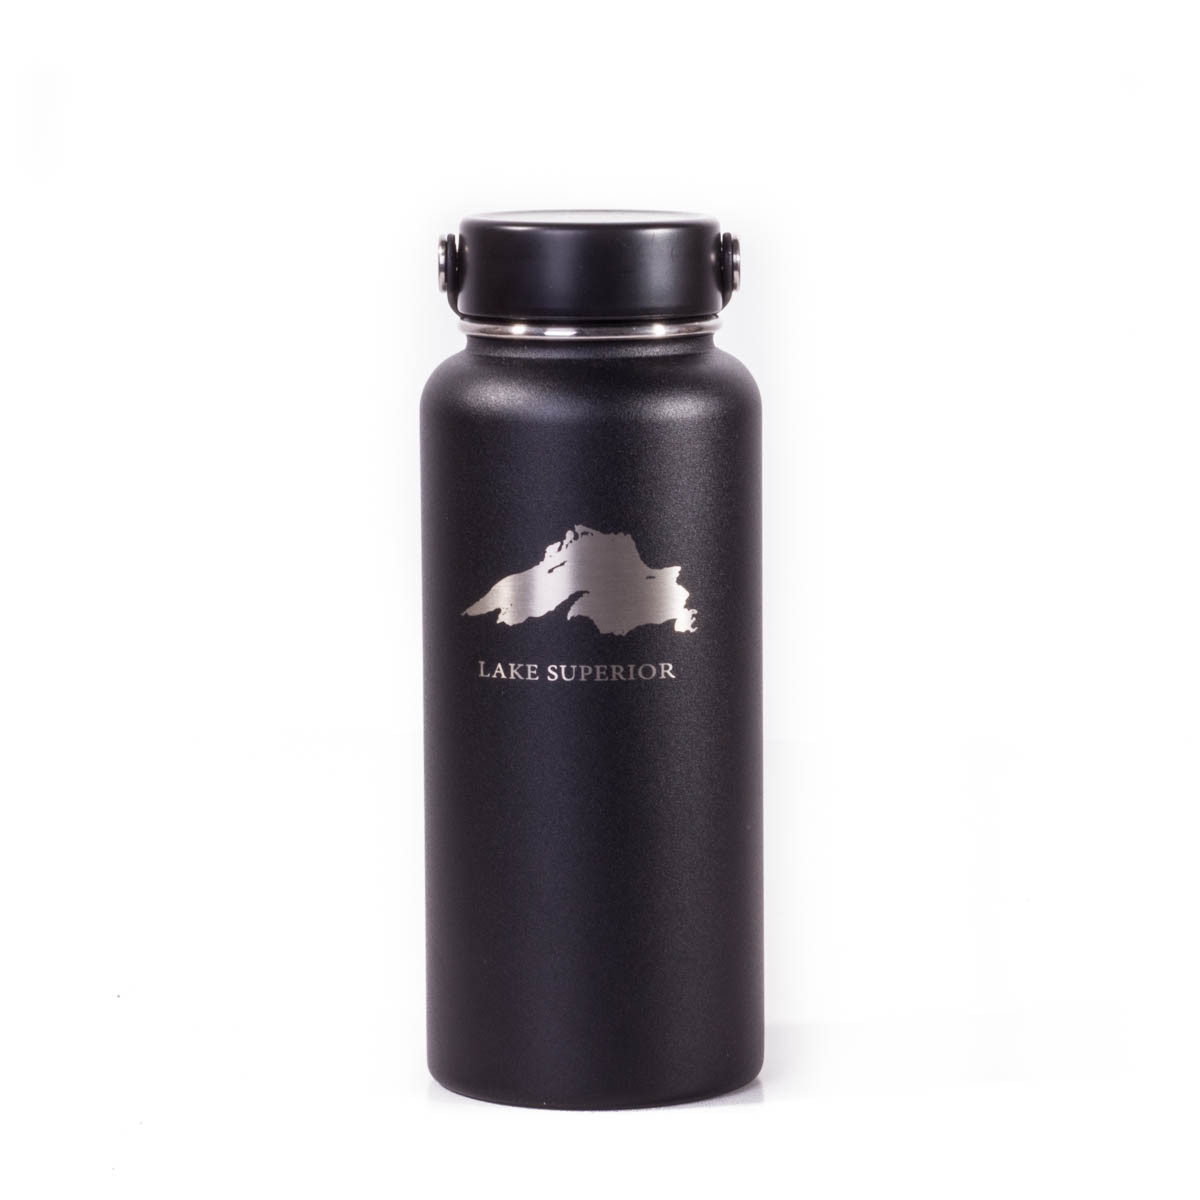 http://www.getzs.com/images/products/78941/full_hydroflask-320wmfblack.jpg